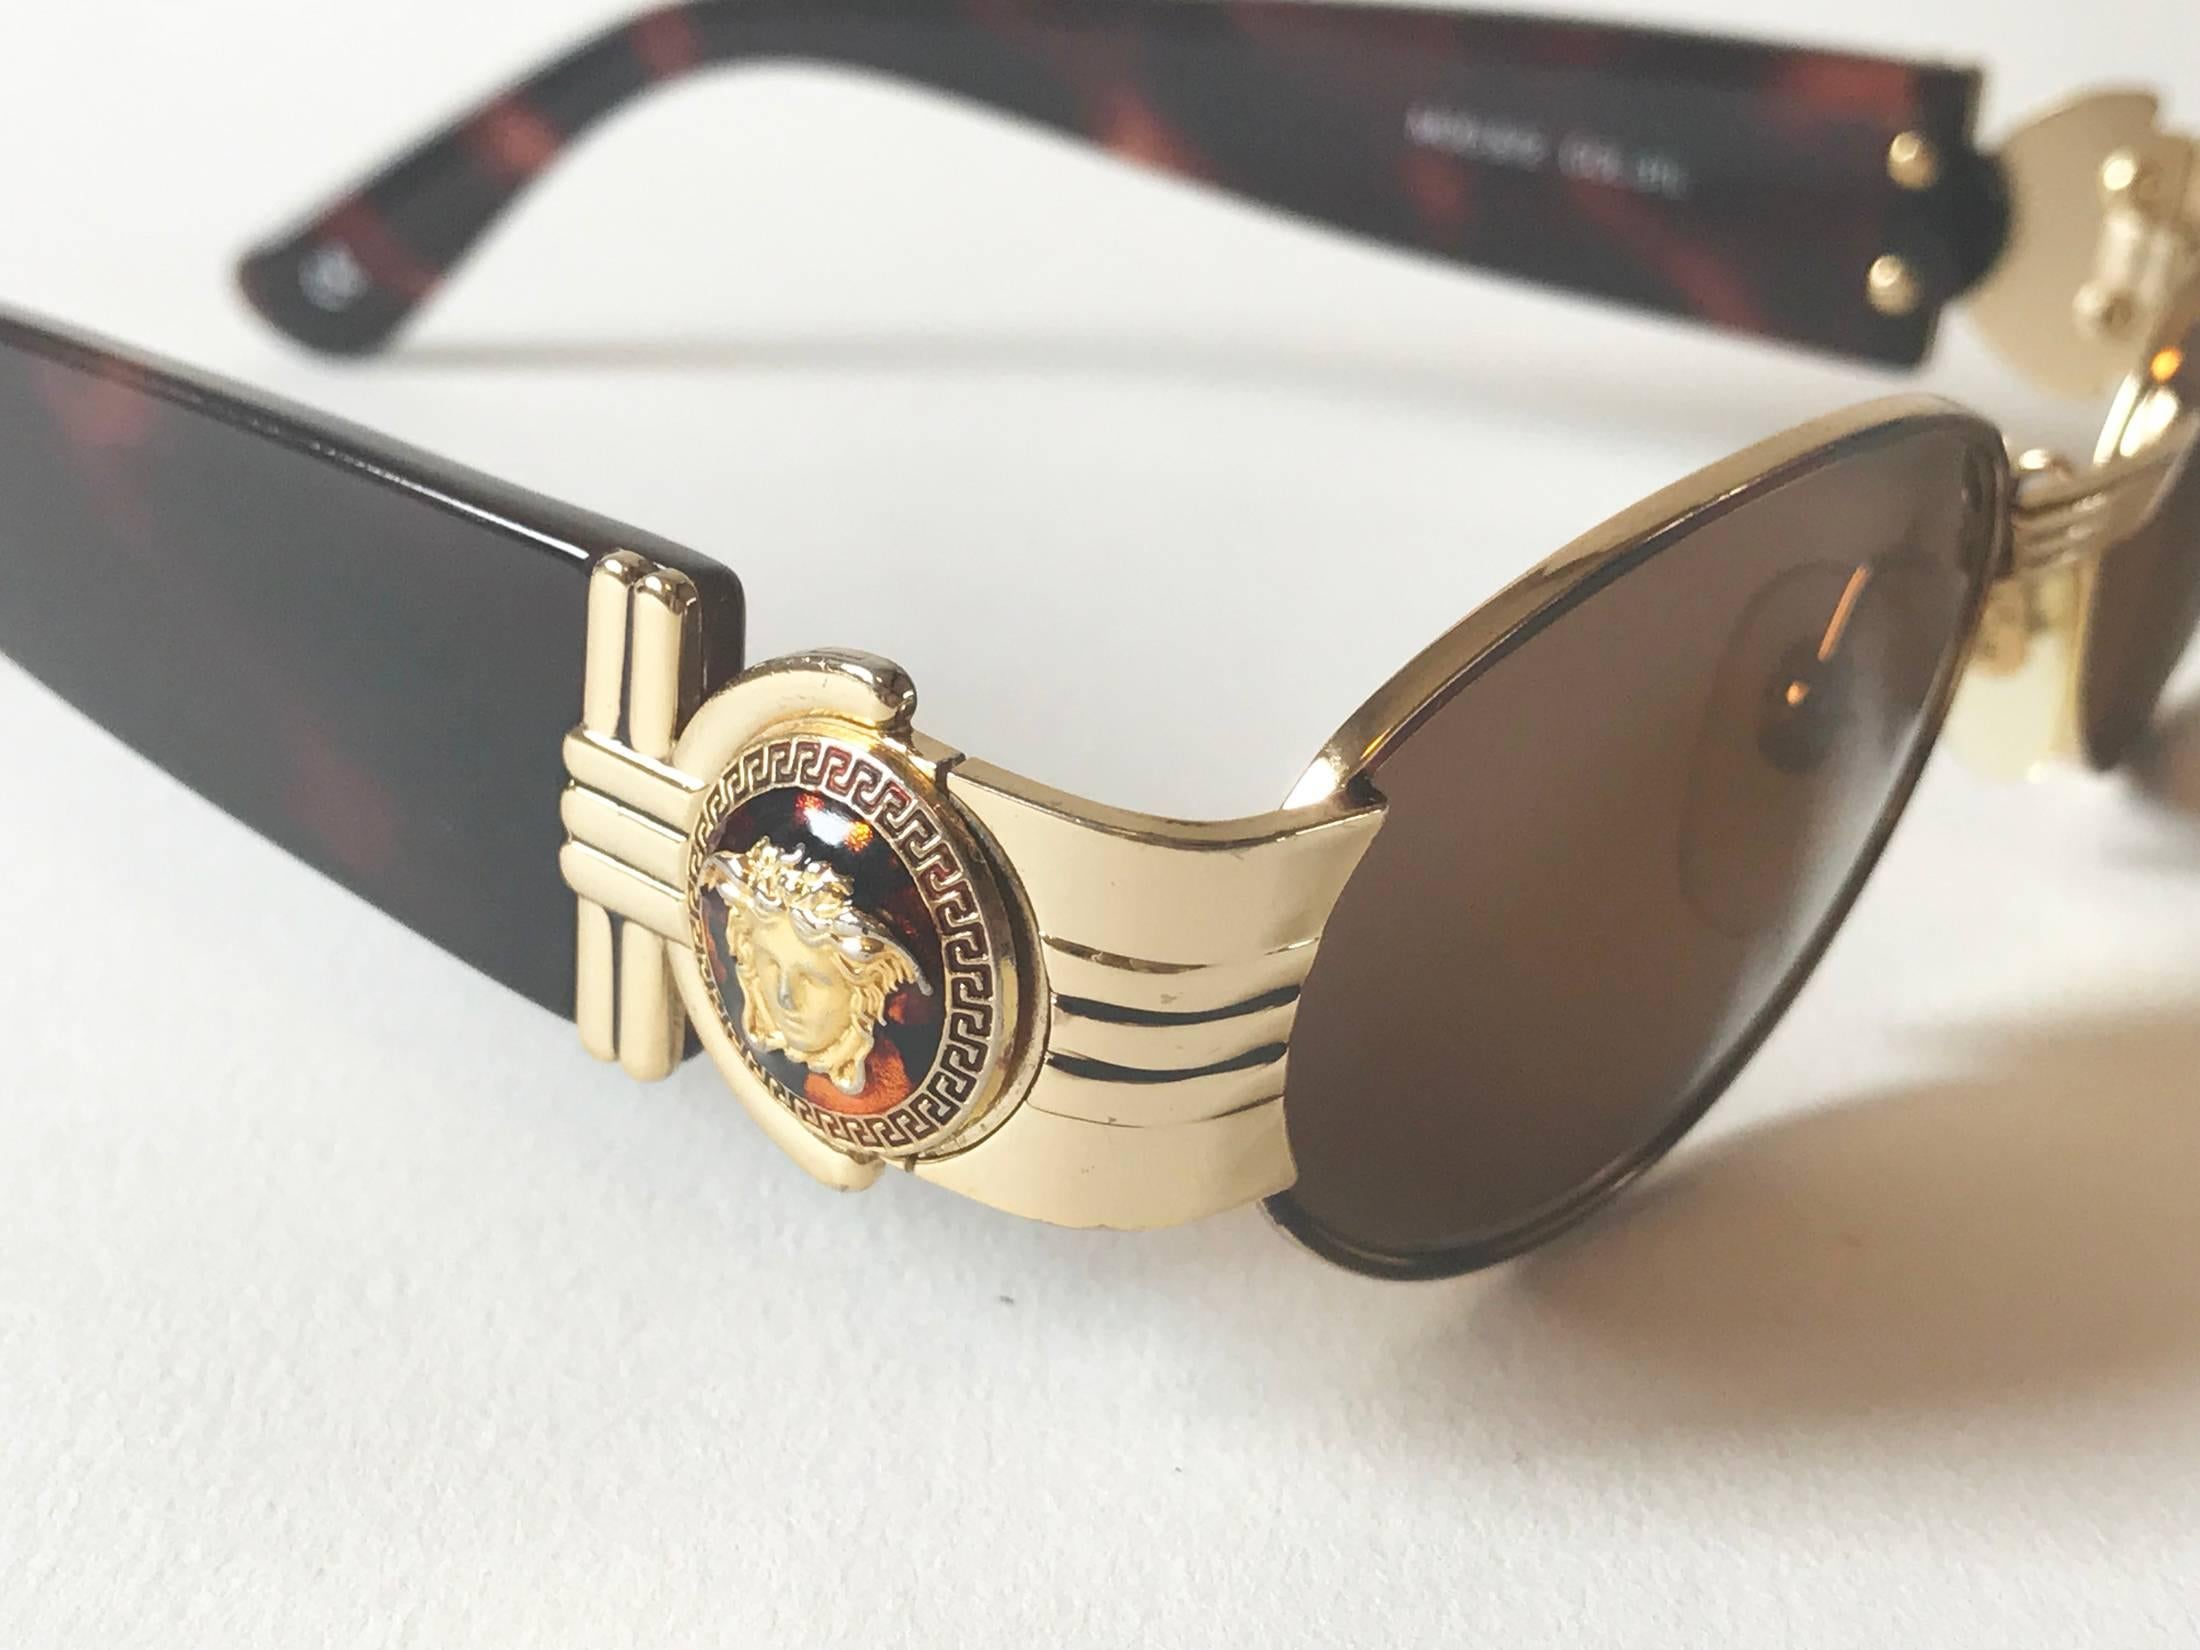 Luxury Iconic Gianni Versace Sunglasses. Mod. S72 Col. 31L, frame is  varnish turtle colour and gold plated metal, the arms are bakelite turtle colour and the lenses are brown colour matching  the frame. Medusa logo is on both sides of the glasses.